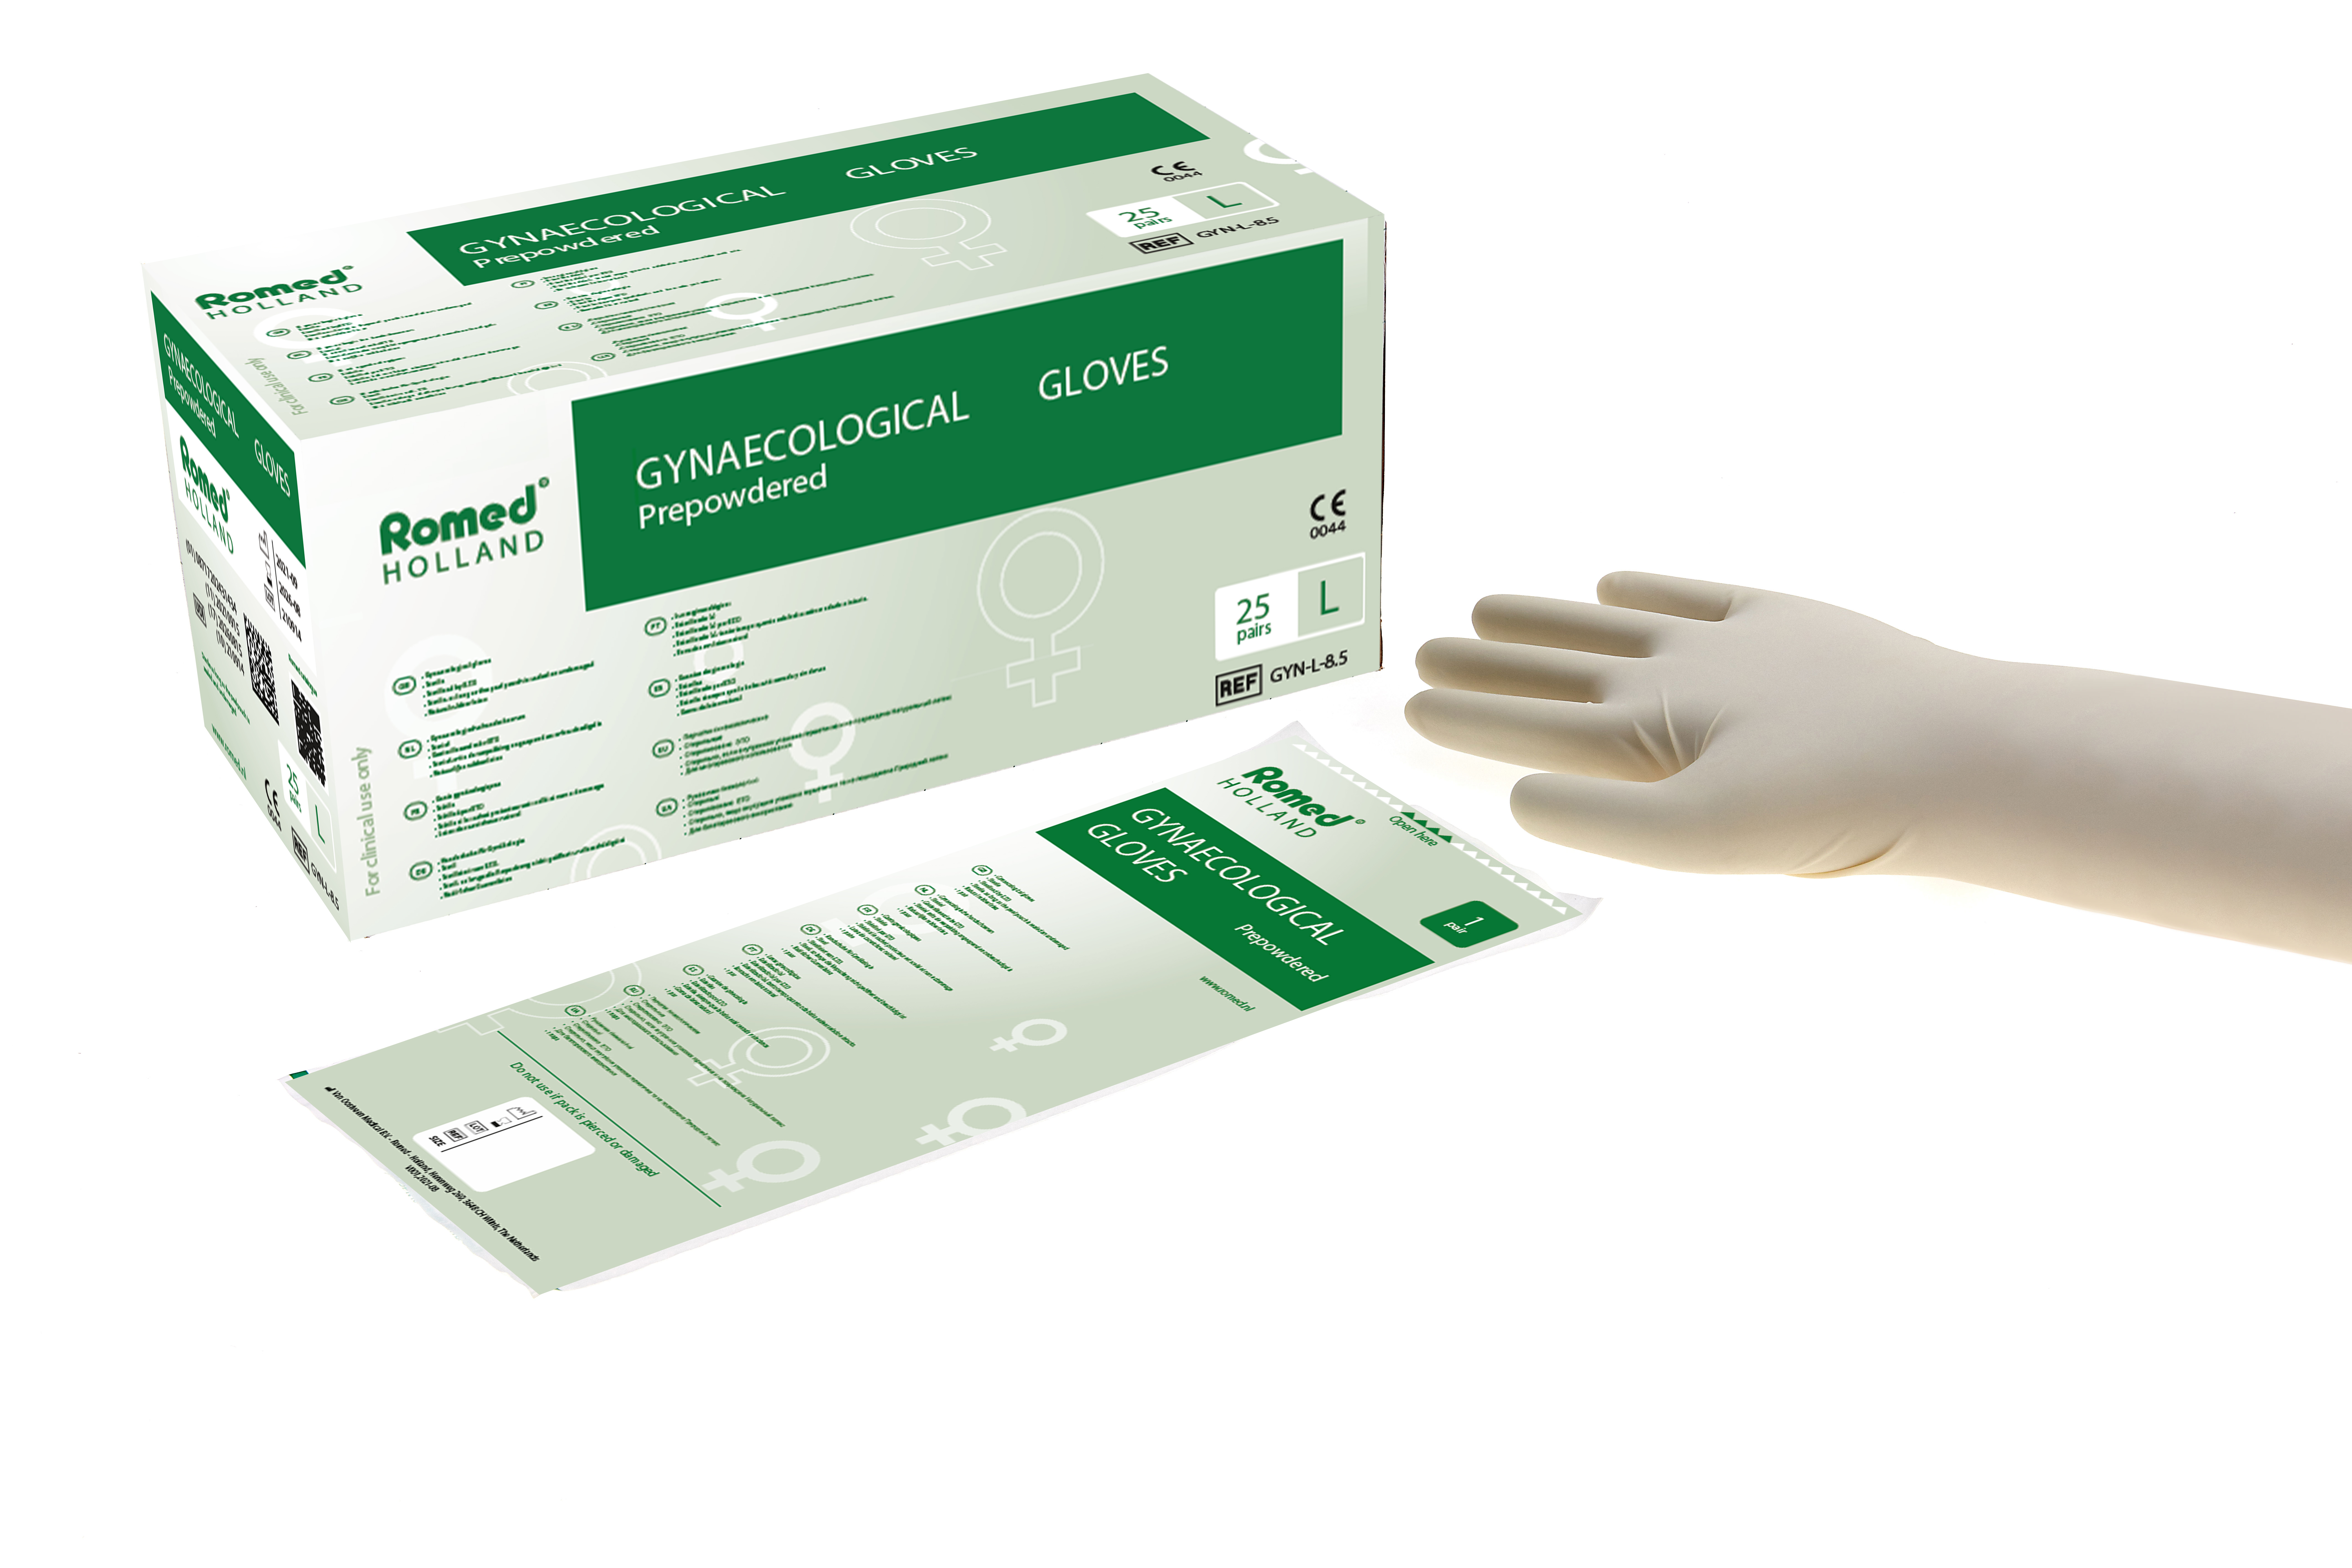 GYN-M-7.5 Romed gynaecological gloves, length 50cm, prepowdered, size medium, sterile per pair, 25 pairs in an inner box, 4 x 25 pairs = 100 pairs in a carton.